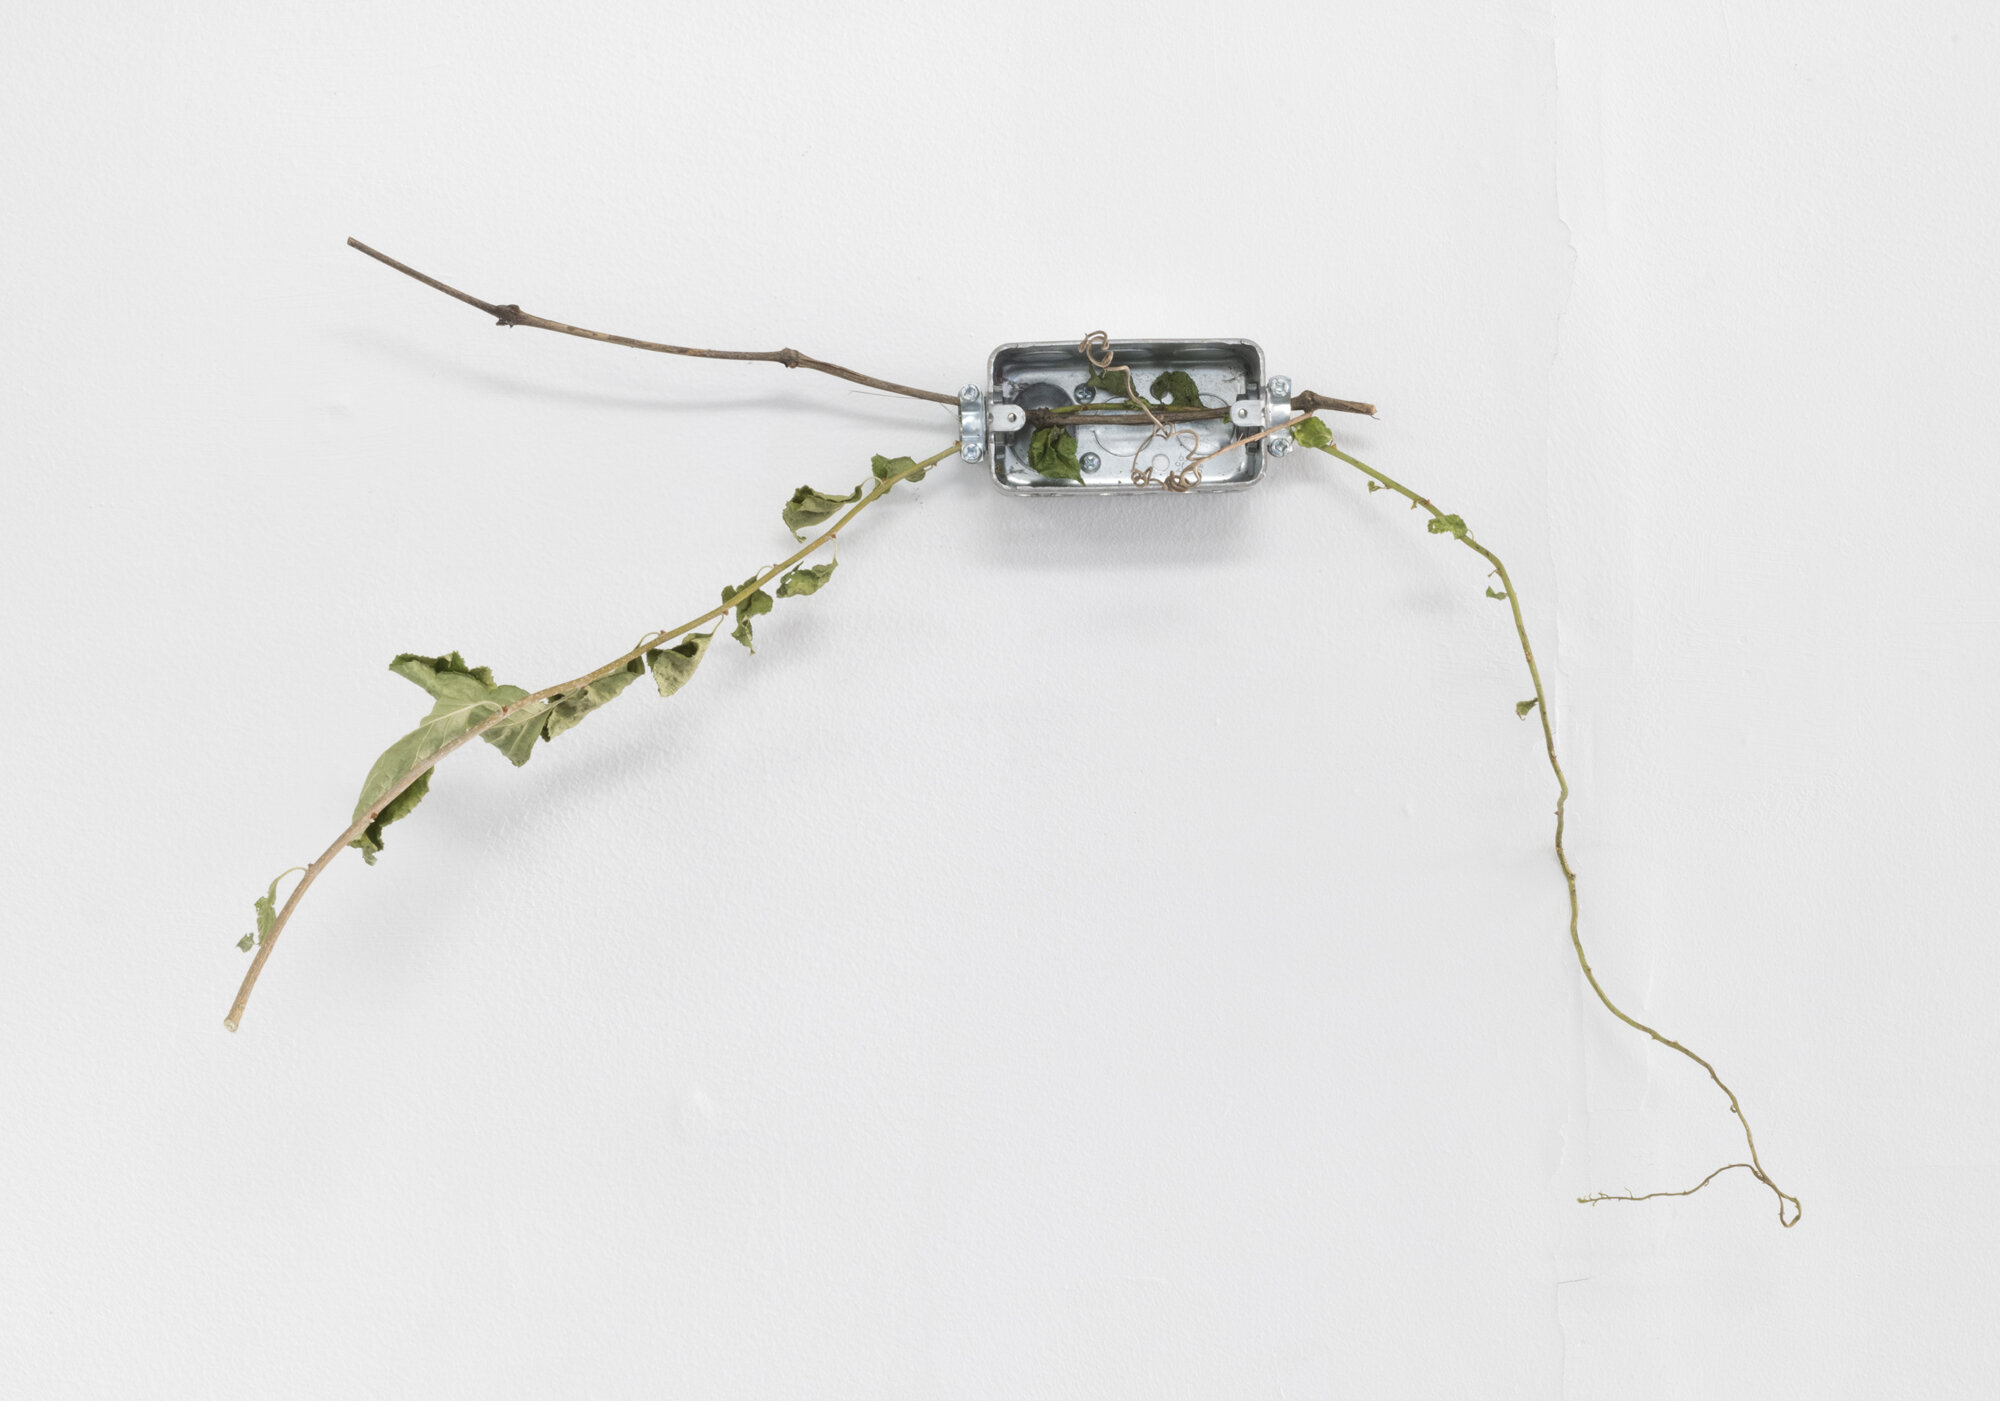  Ryan Foerster,  Power Plant (2),  2021. Electrical junction boxes with plants. 17 x 21 x 7 inches. 